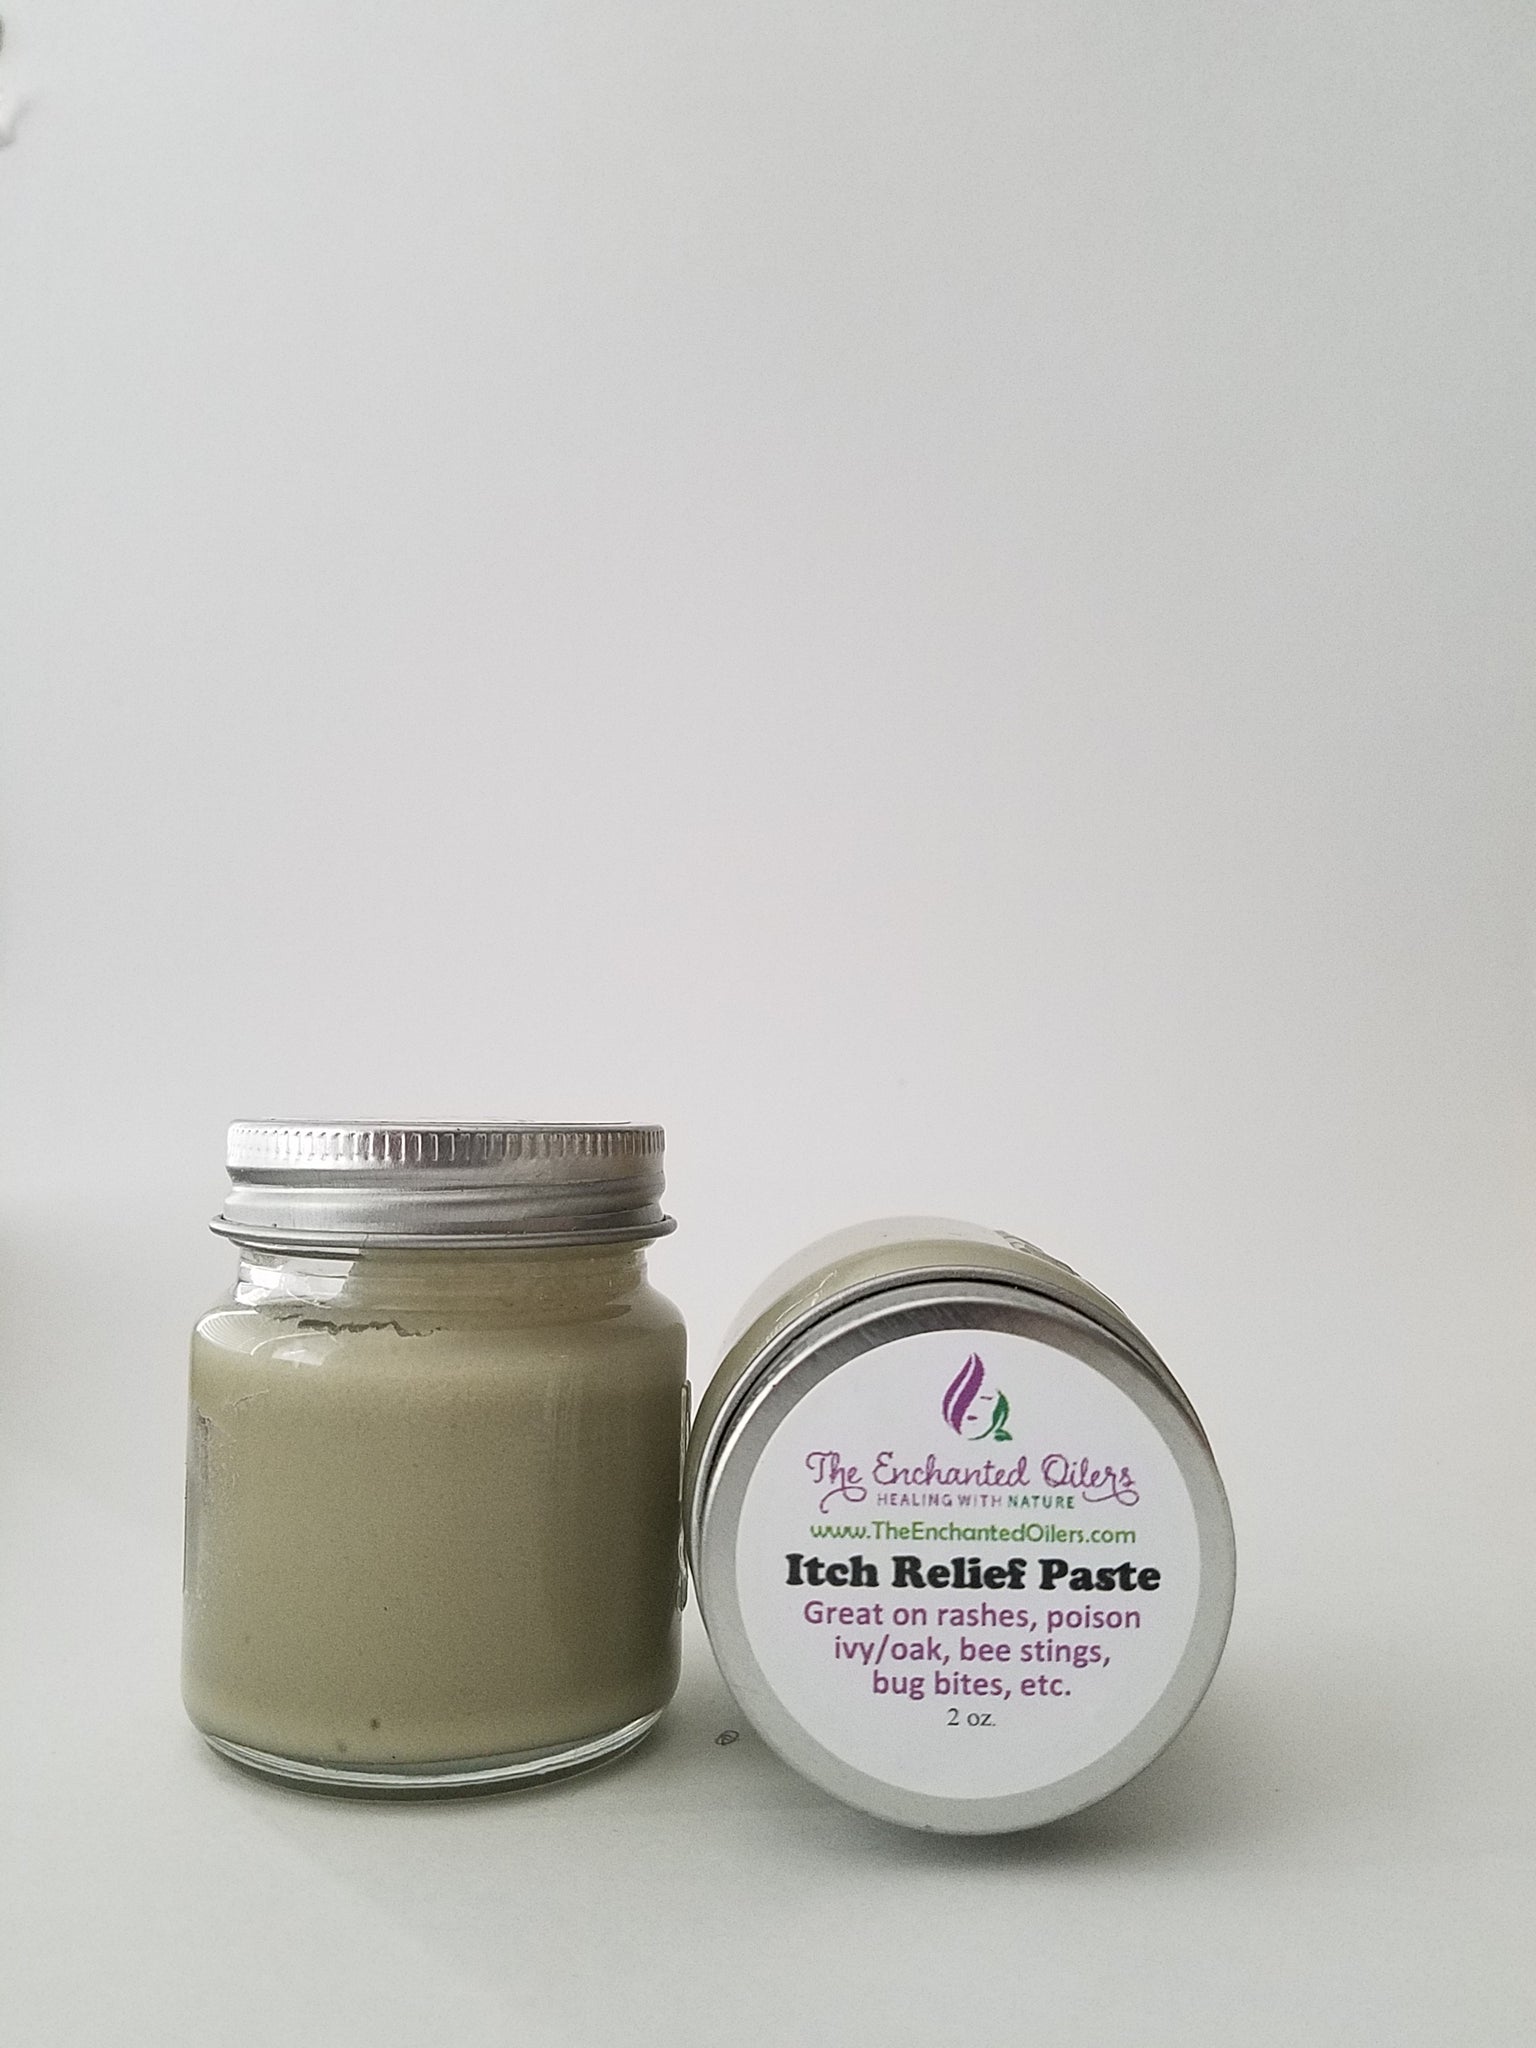 Itch Relief Paste